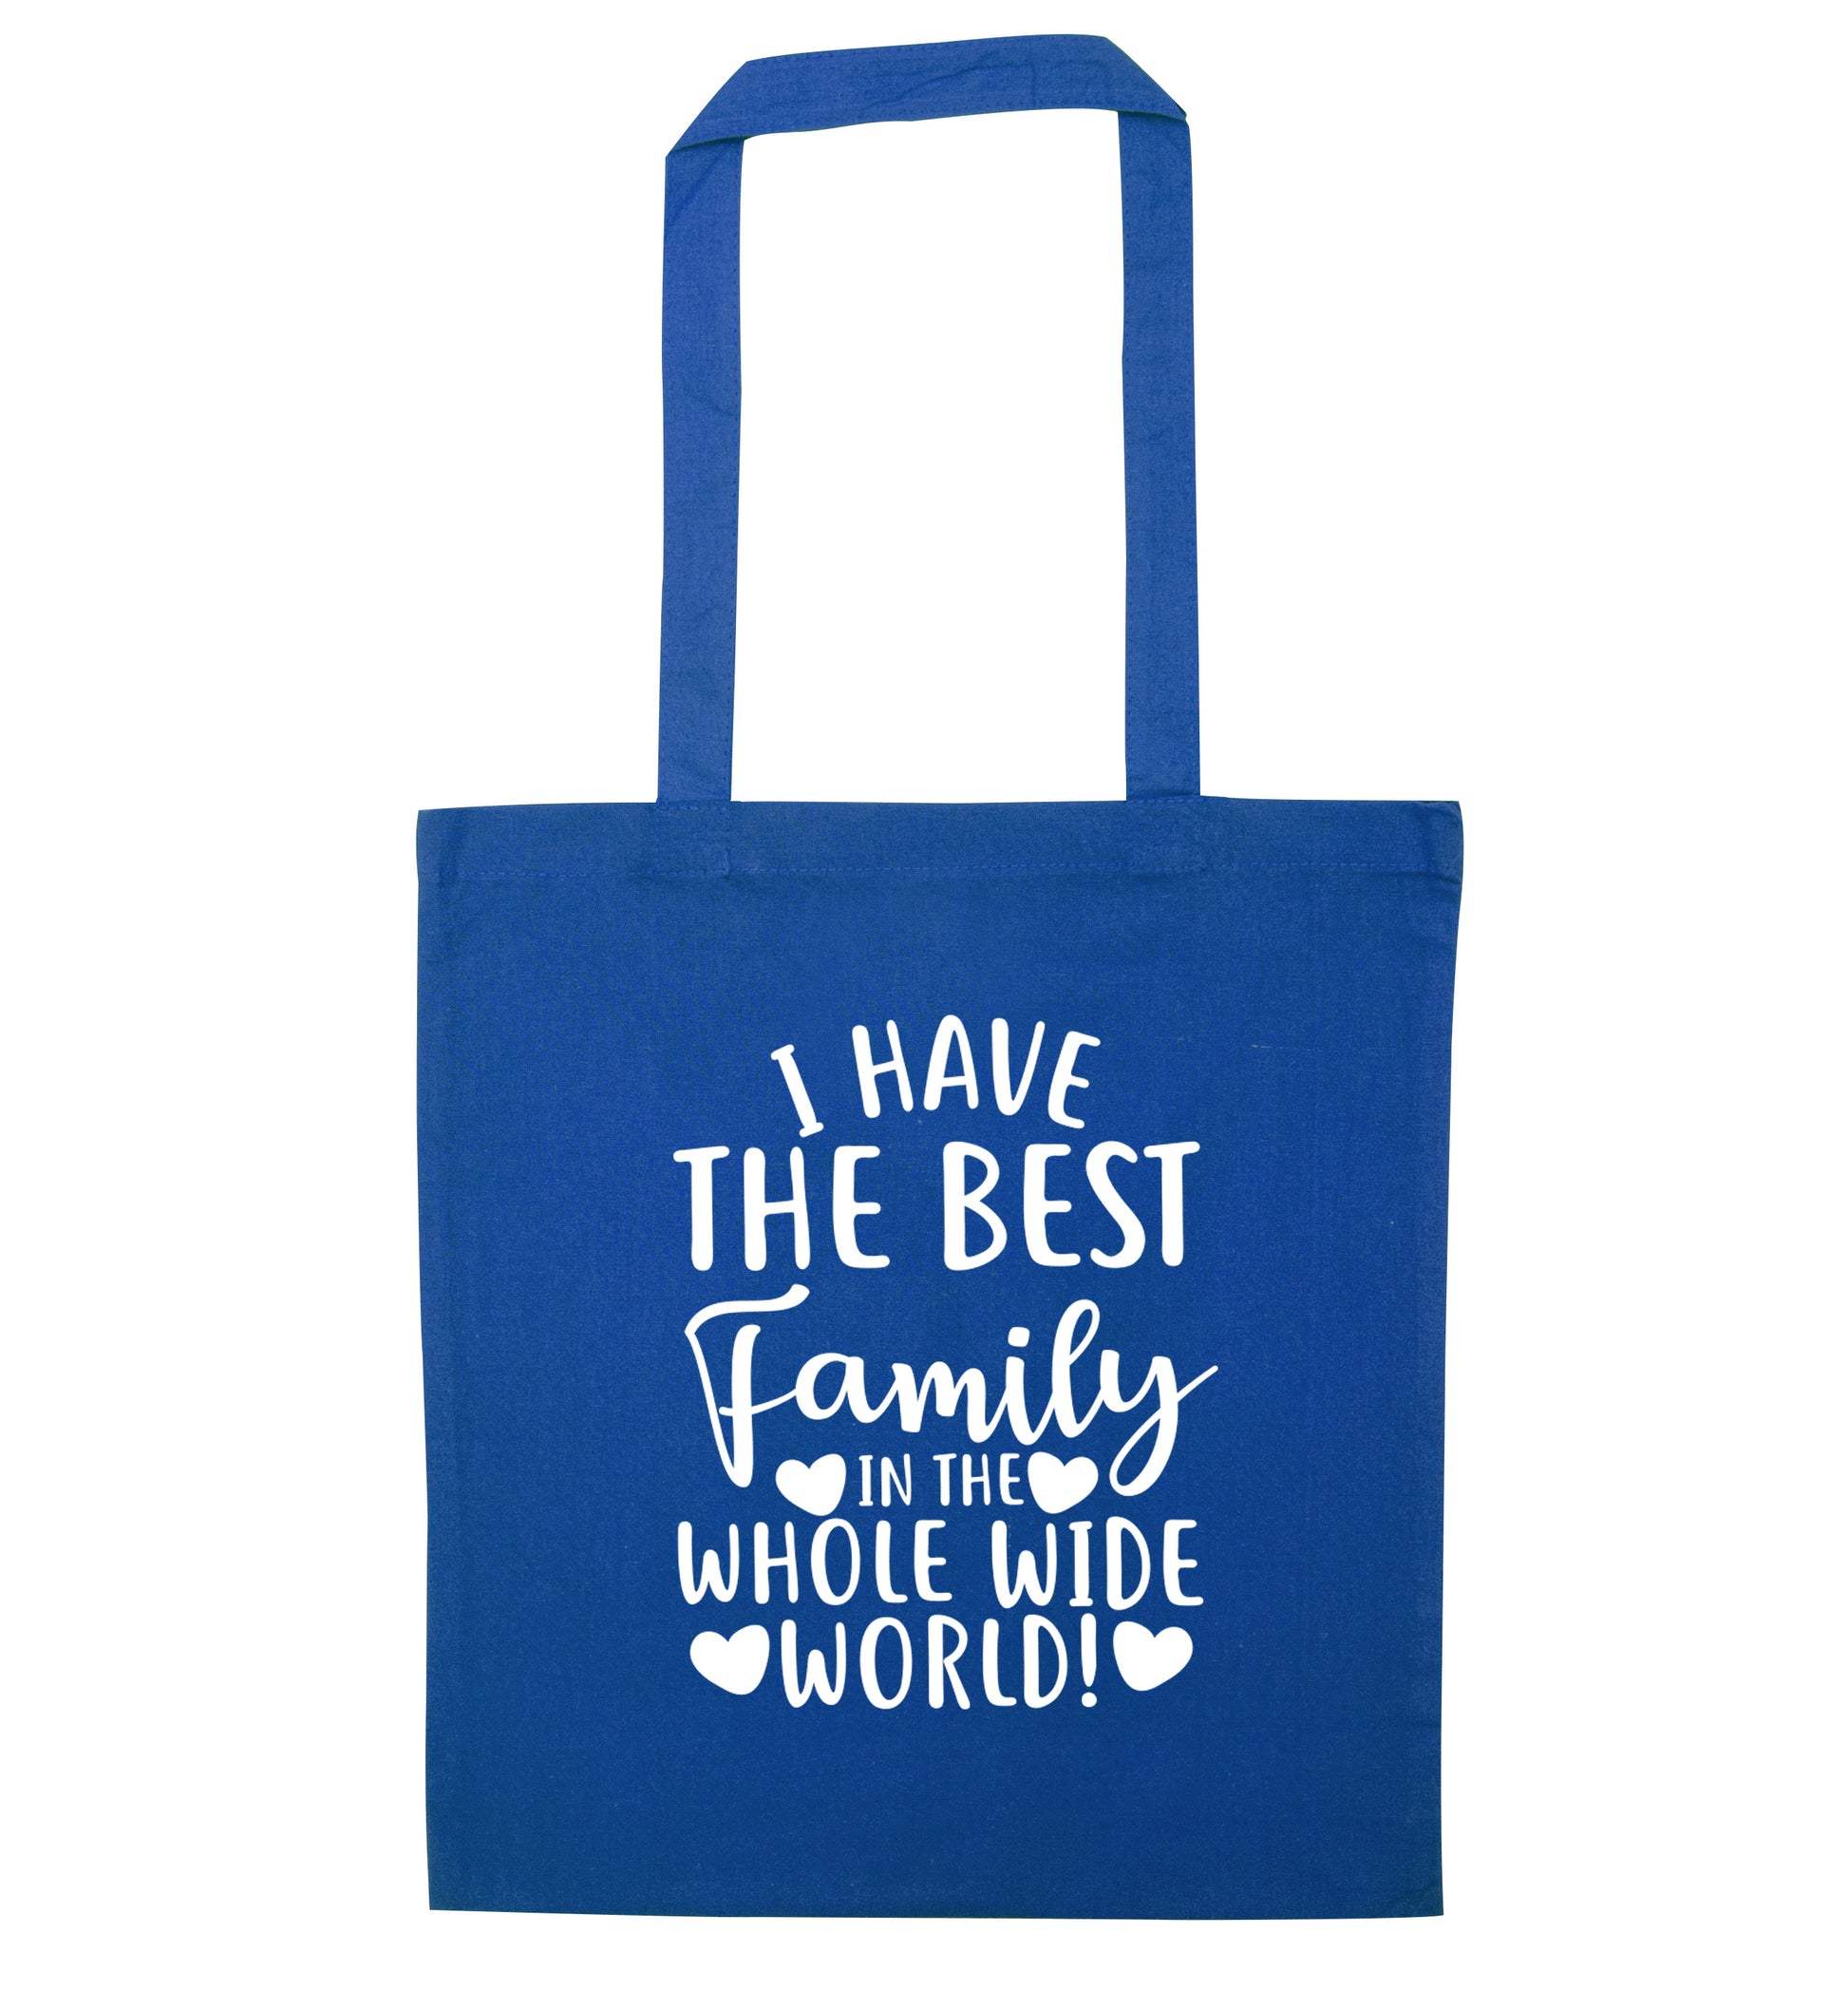 I have the best family in the whole wide world! blue tote bag